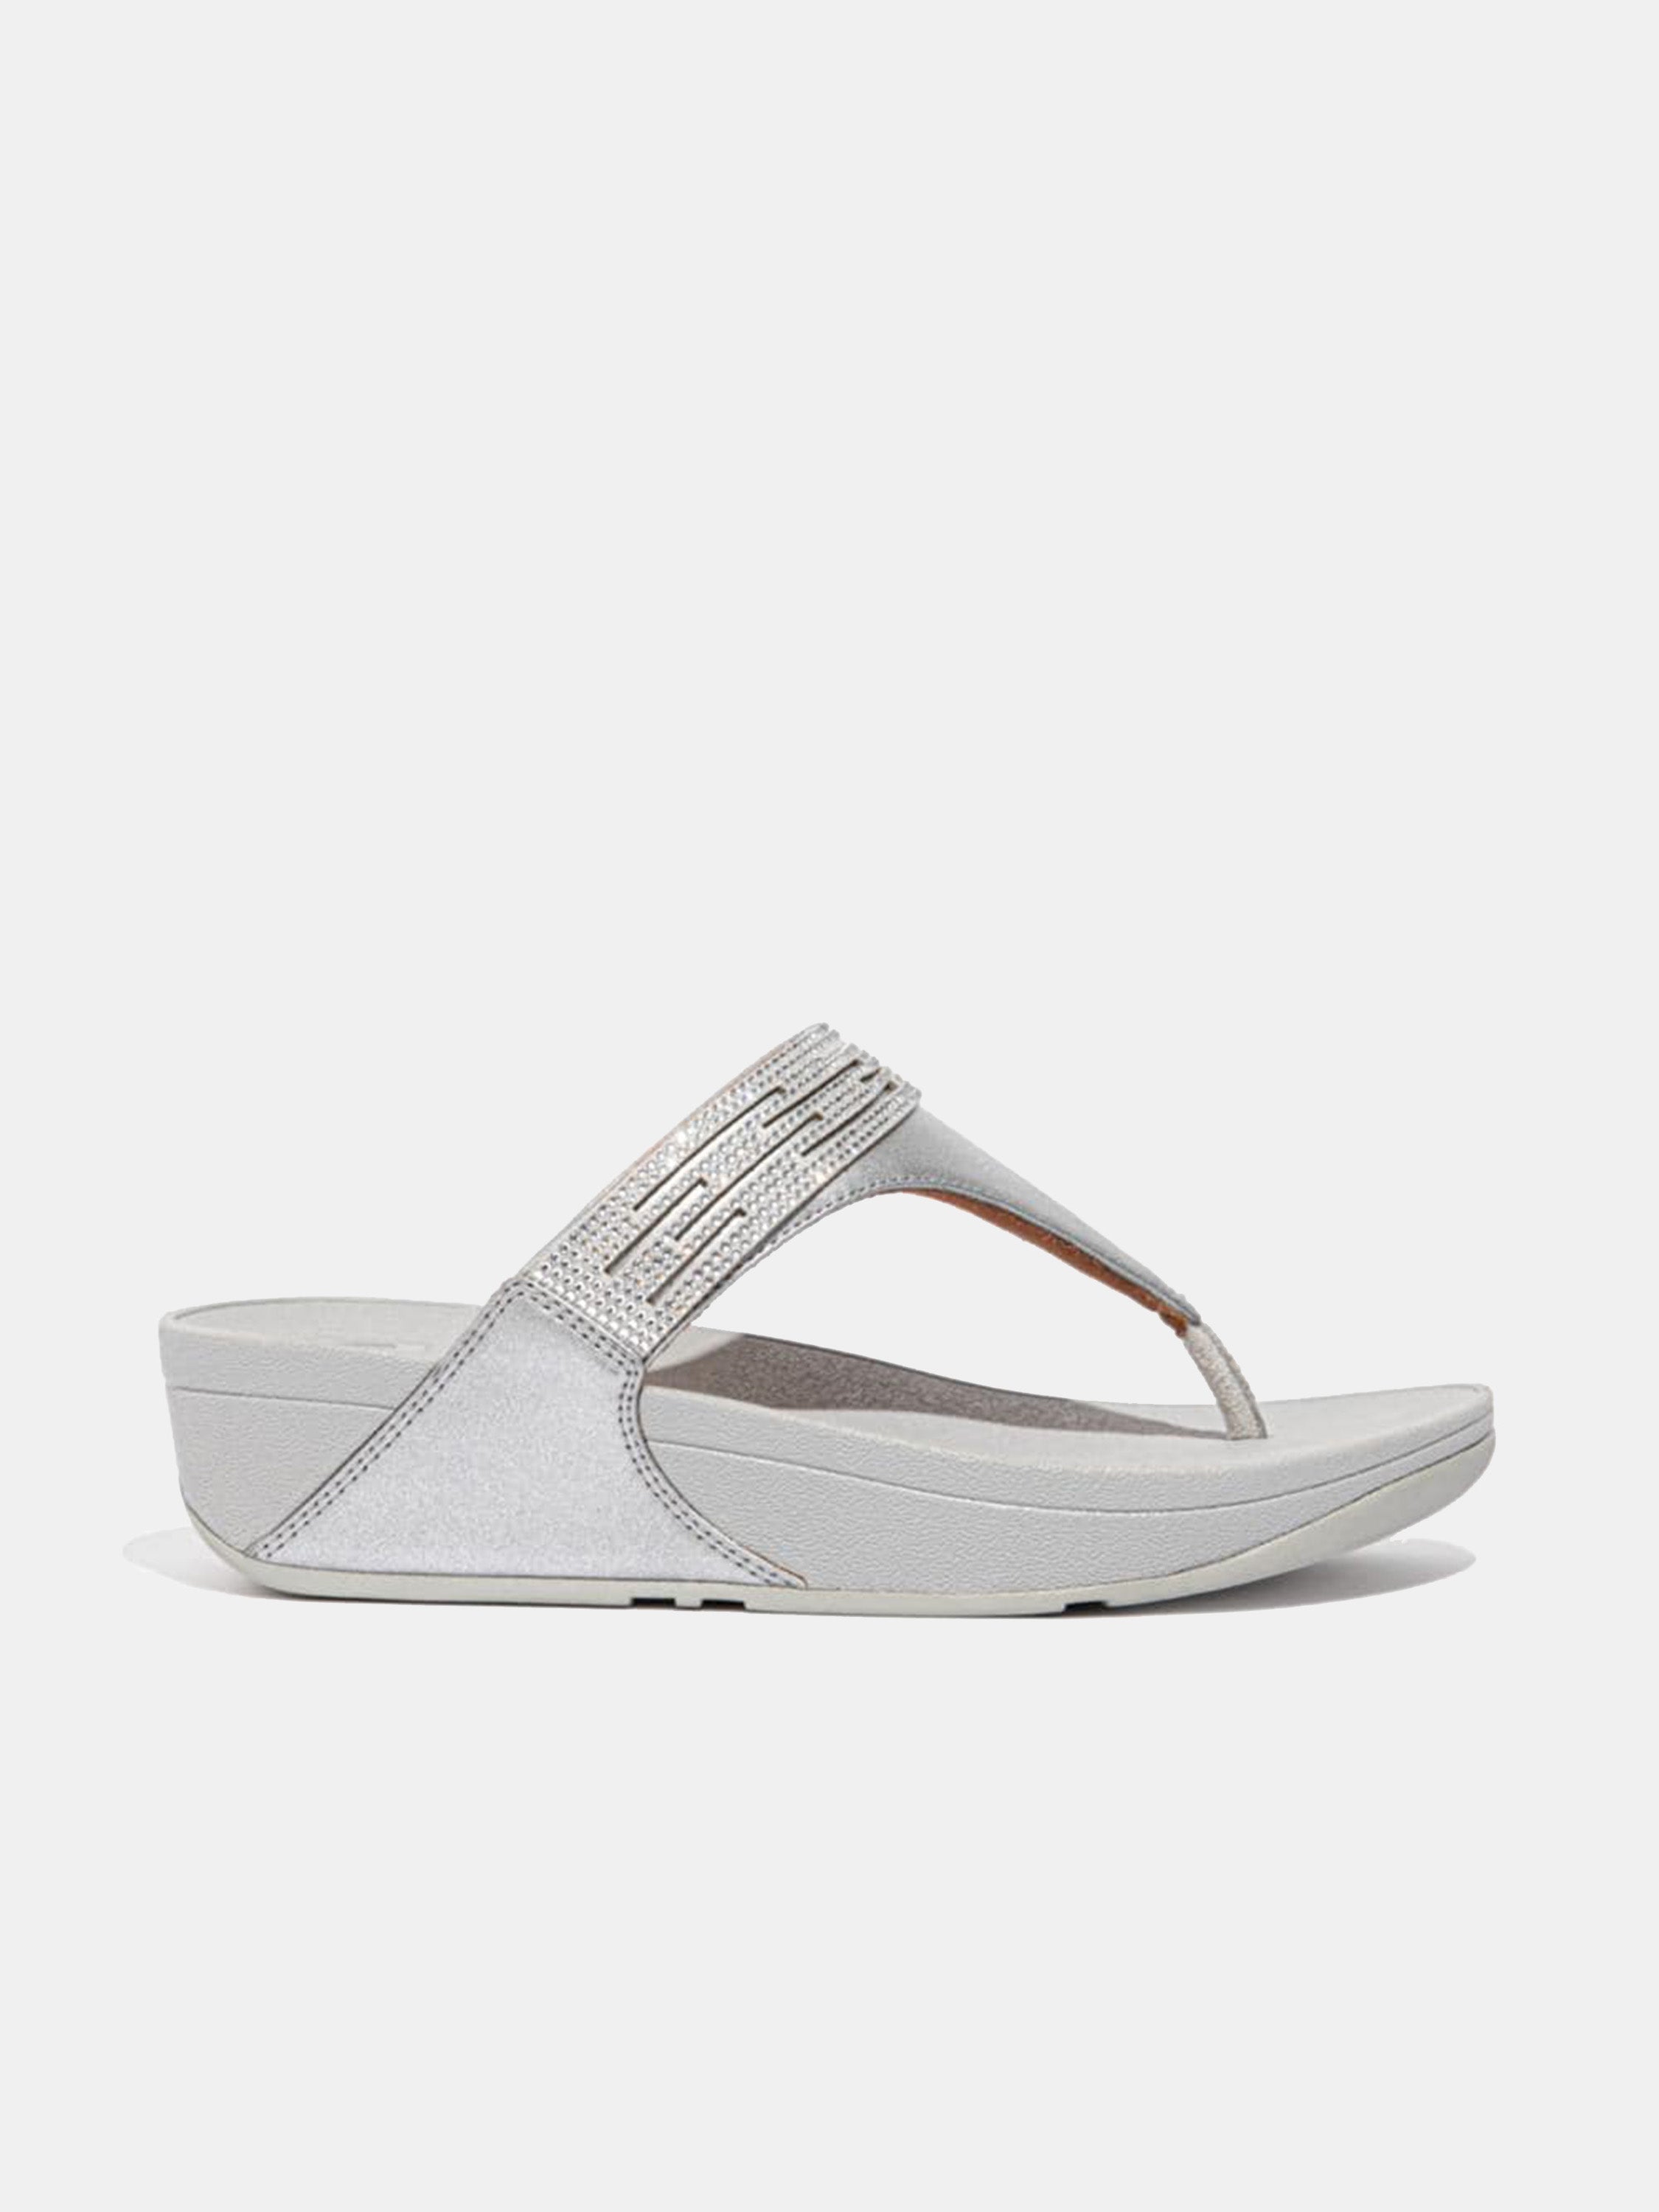 FitFlop Lulu Women's Lasercrystal Leather Toe-Post Sandals #color_Silver